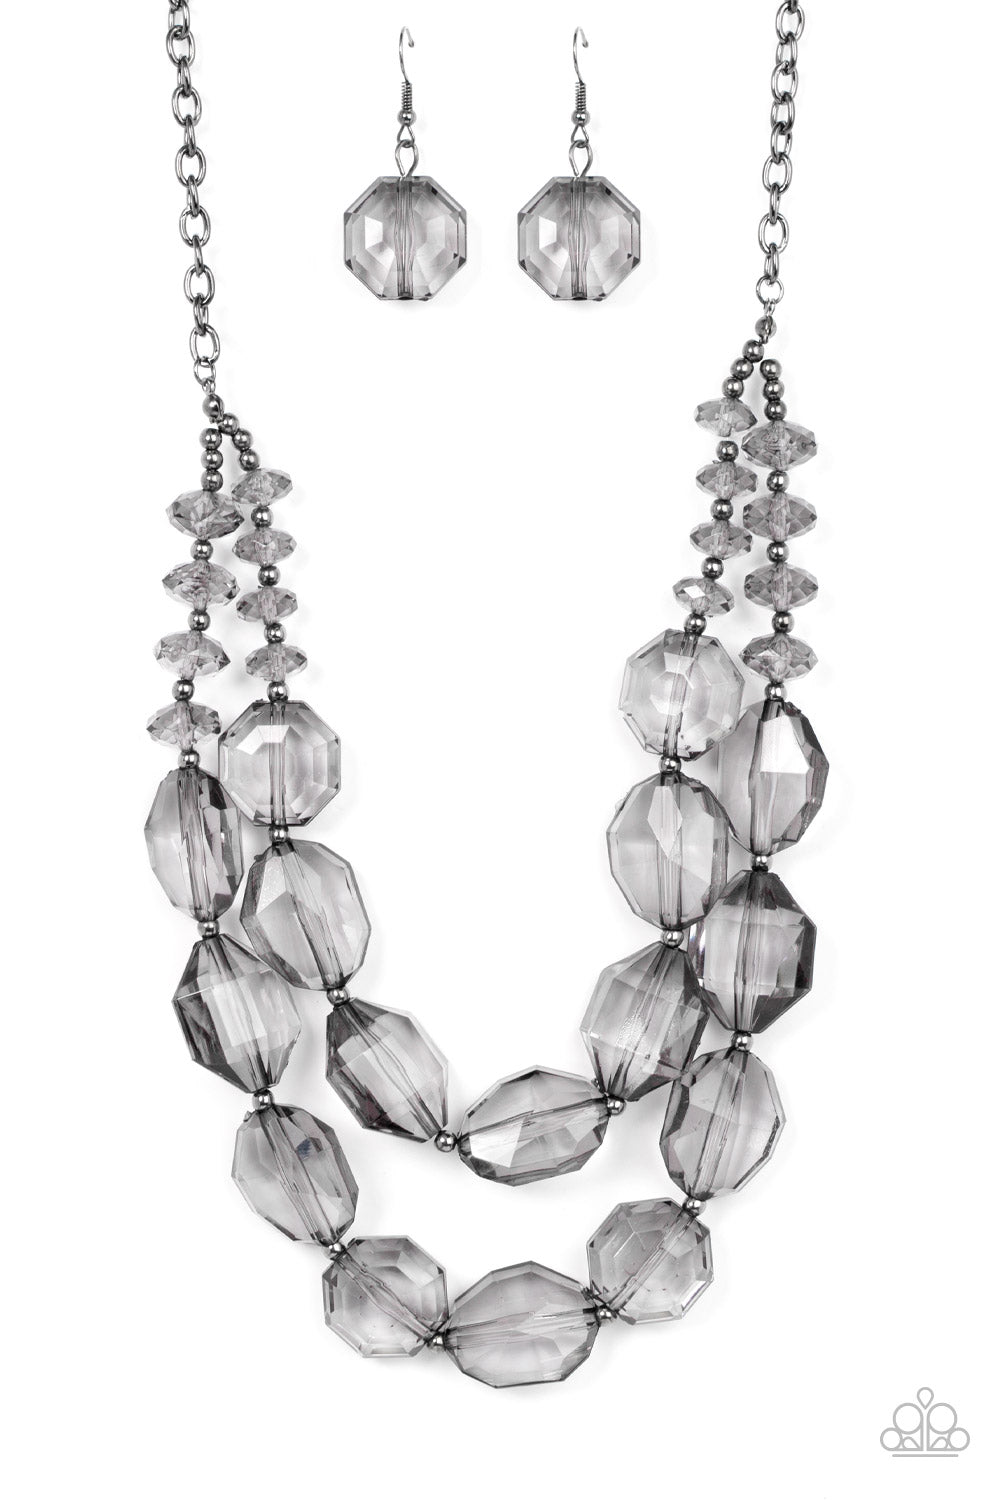 Icy Illumination Paparazzi Accessories Necklace with Earrings Black